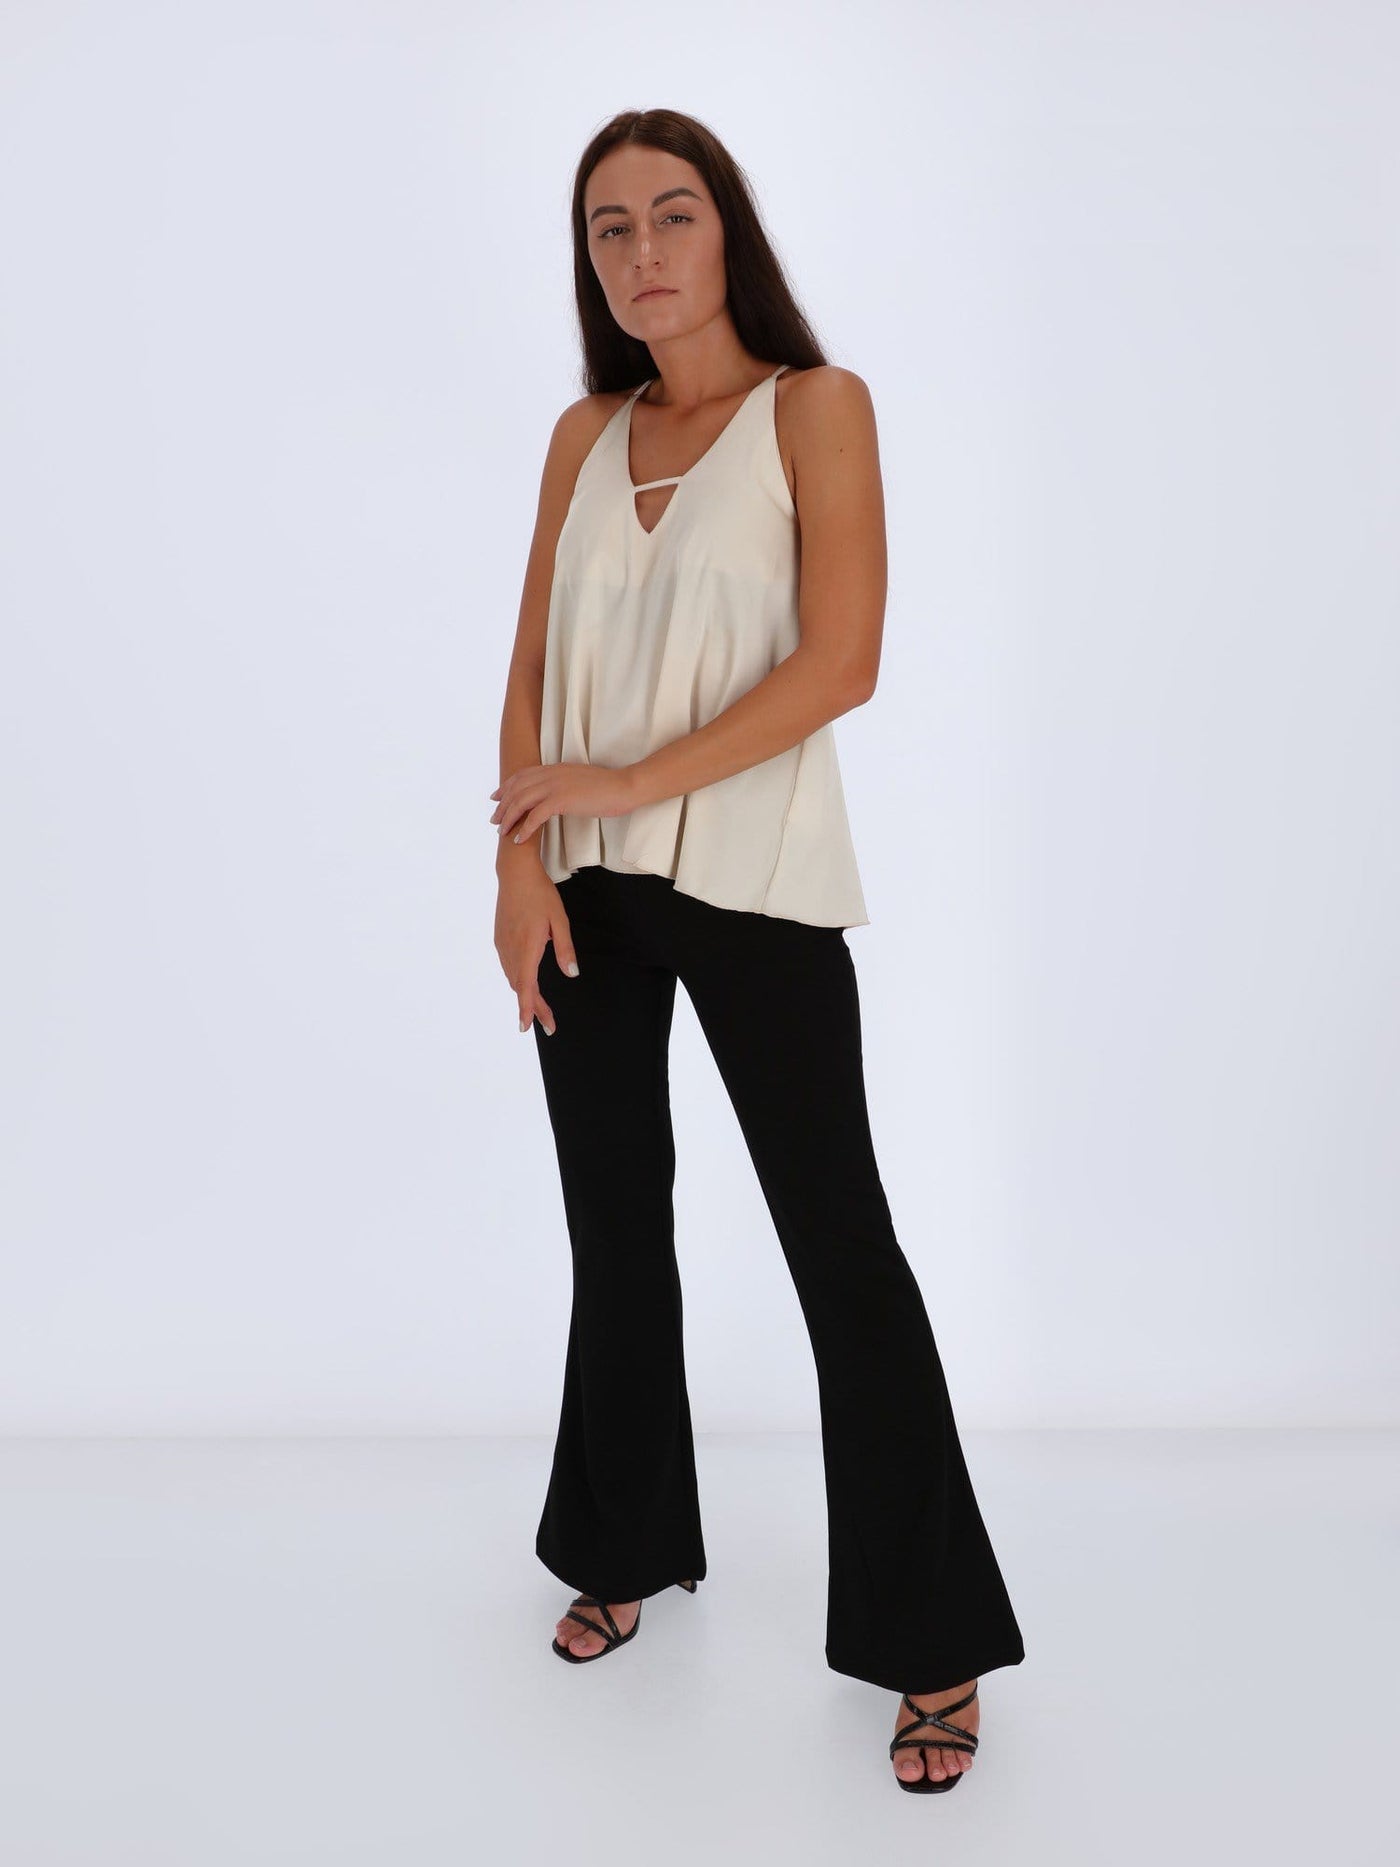 OR Tops & Blouses Cross Back Top with Halter Neck